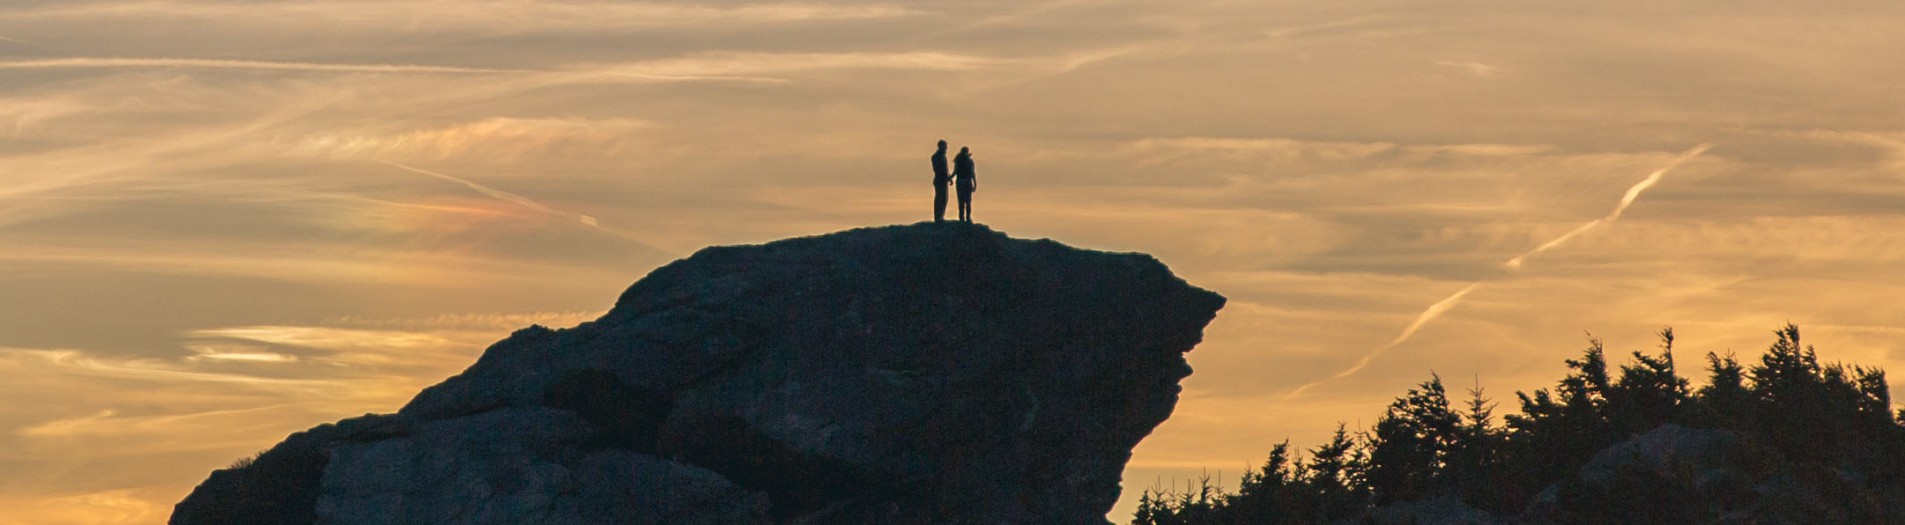 Grayson and Kristen | Grandfather Mountain Backpacking Engagement